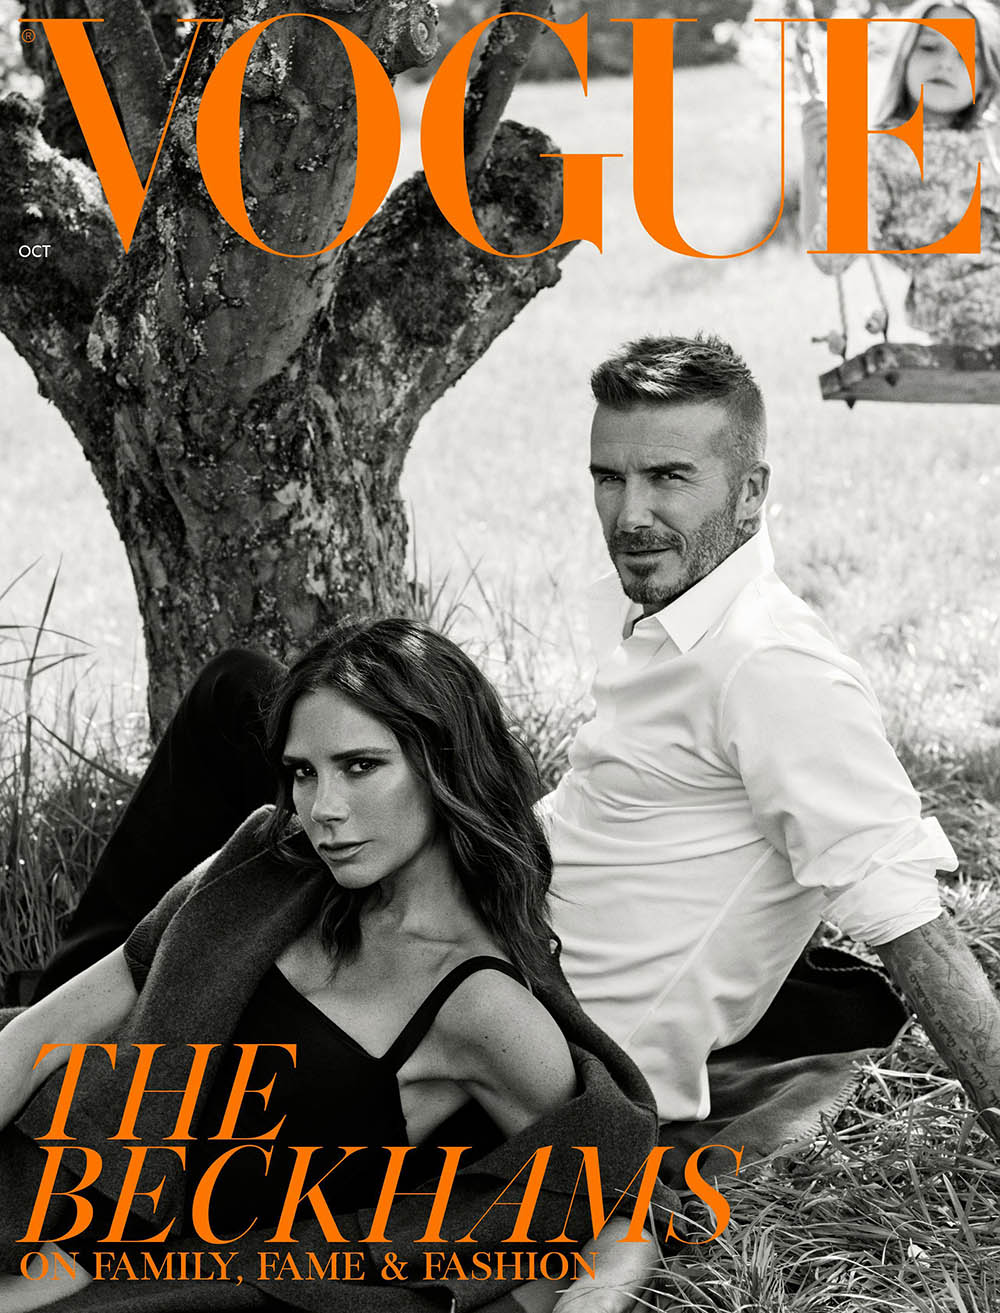 The Beckhams cover British Vogue October 2018 by Mikael Jansson